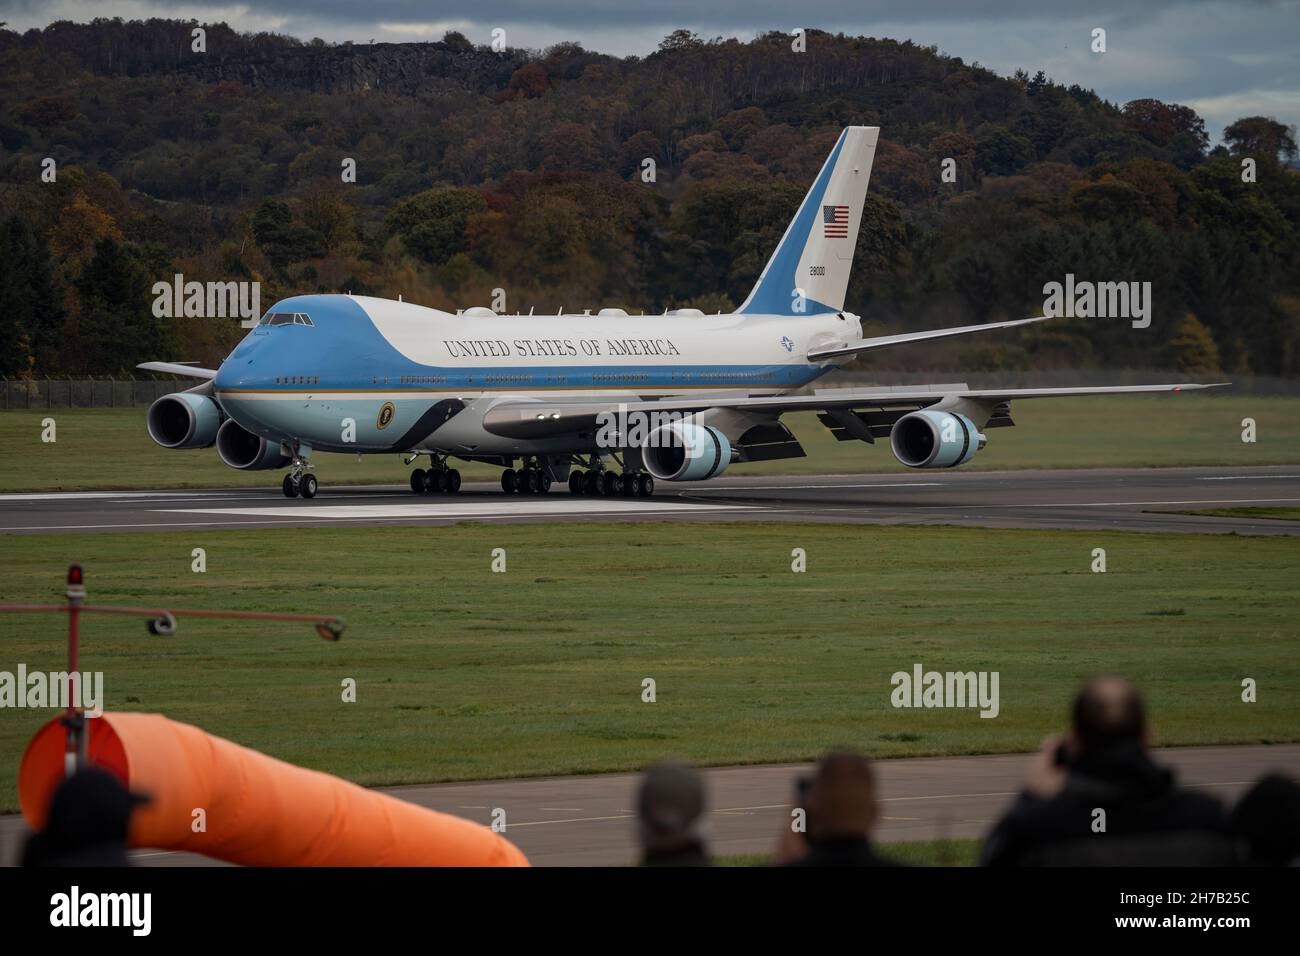 'Air Force One' a USAF VC-25A landing at Edinburgh Scotland for the first time. President Joe Biden took part in the COP26 Climate summit. Stock Photo